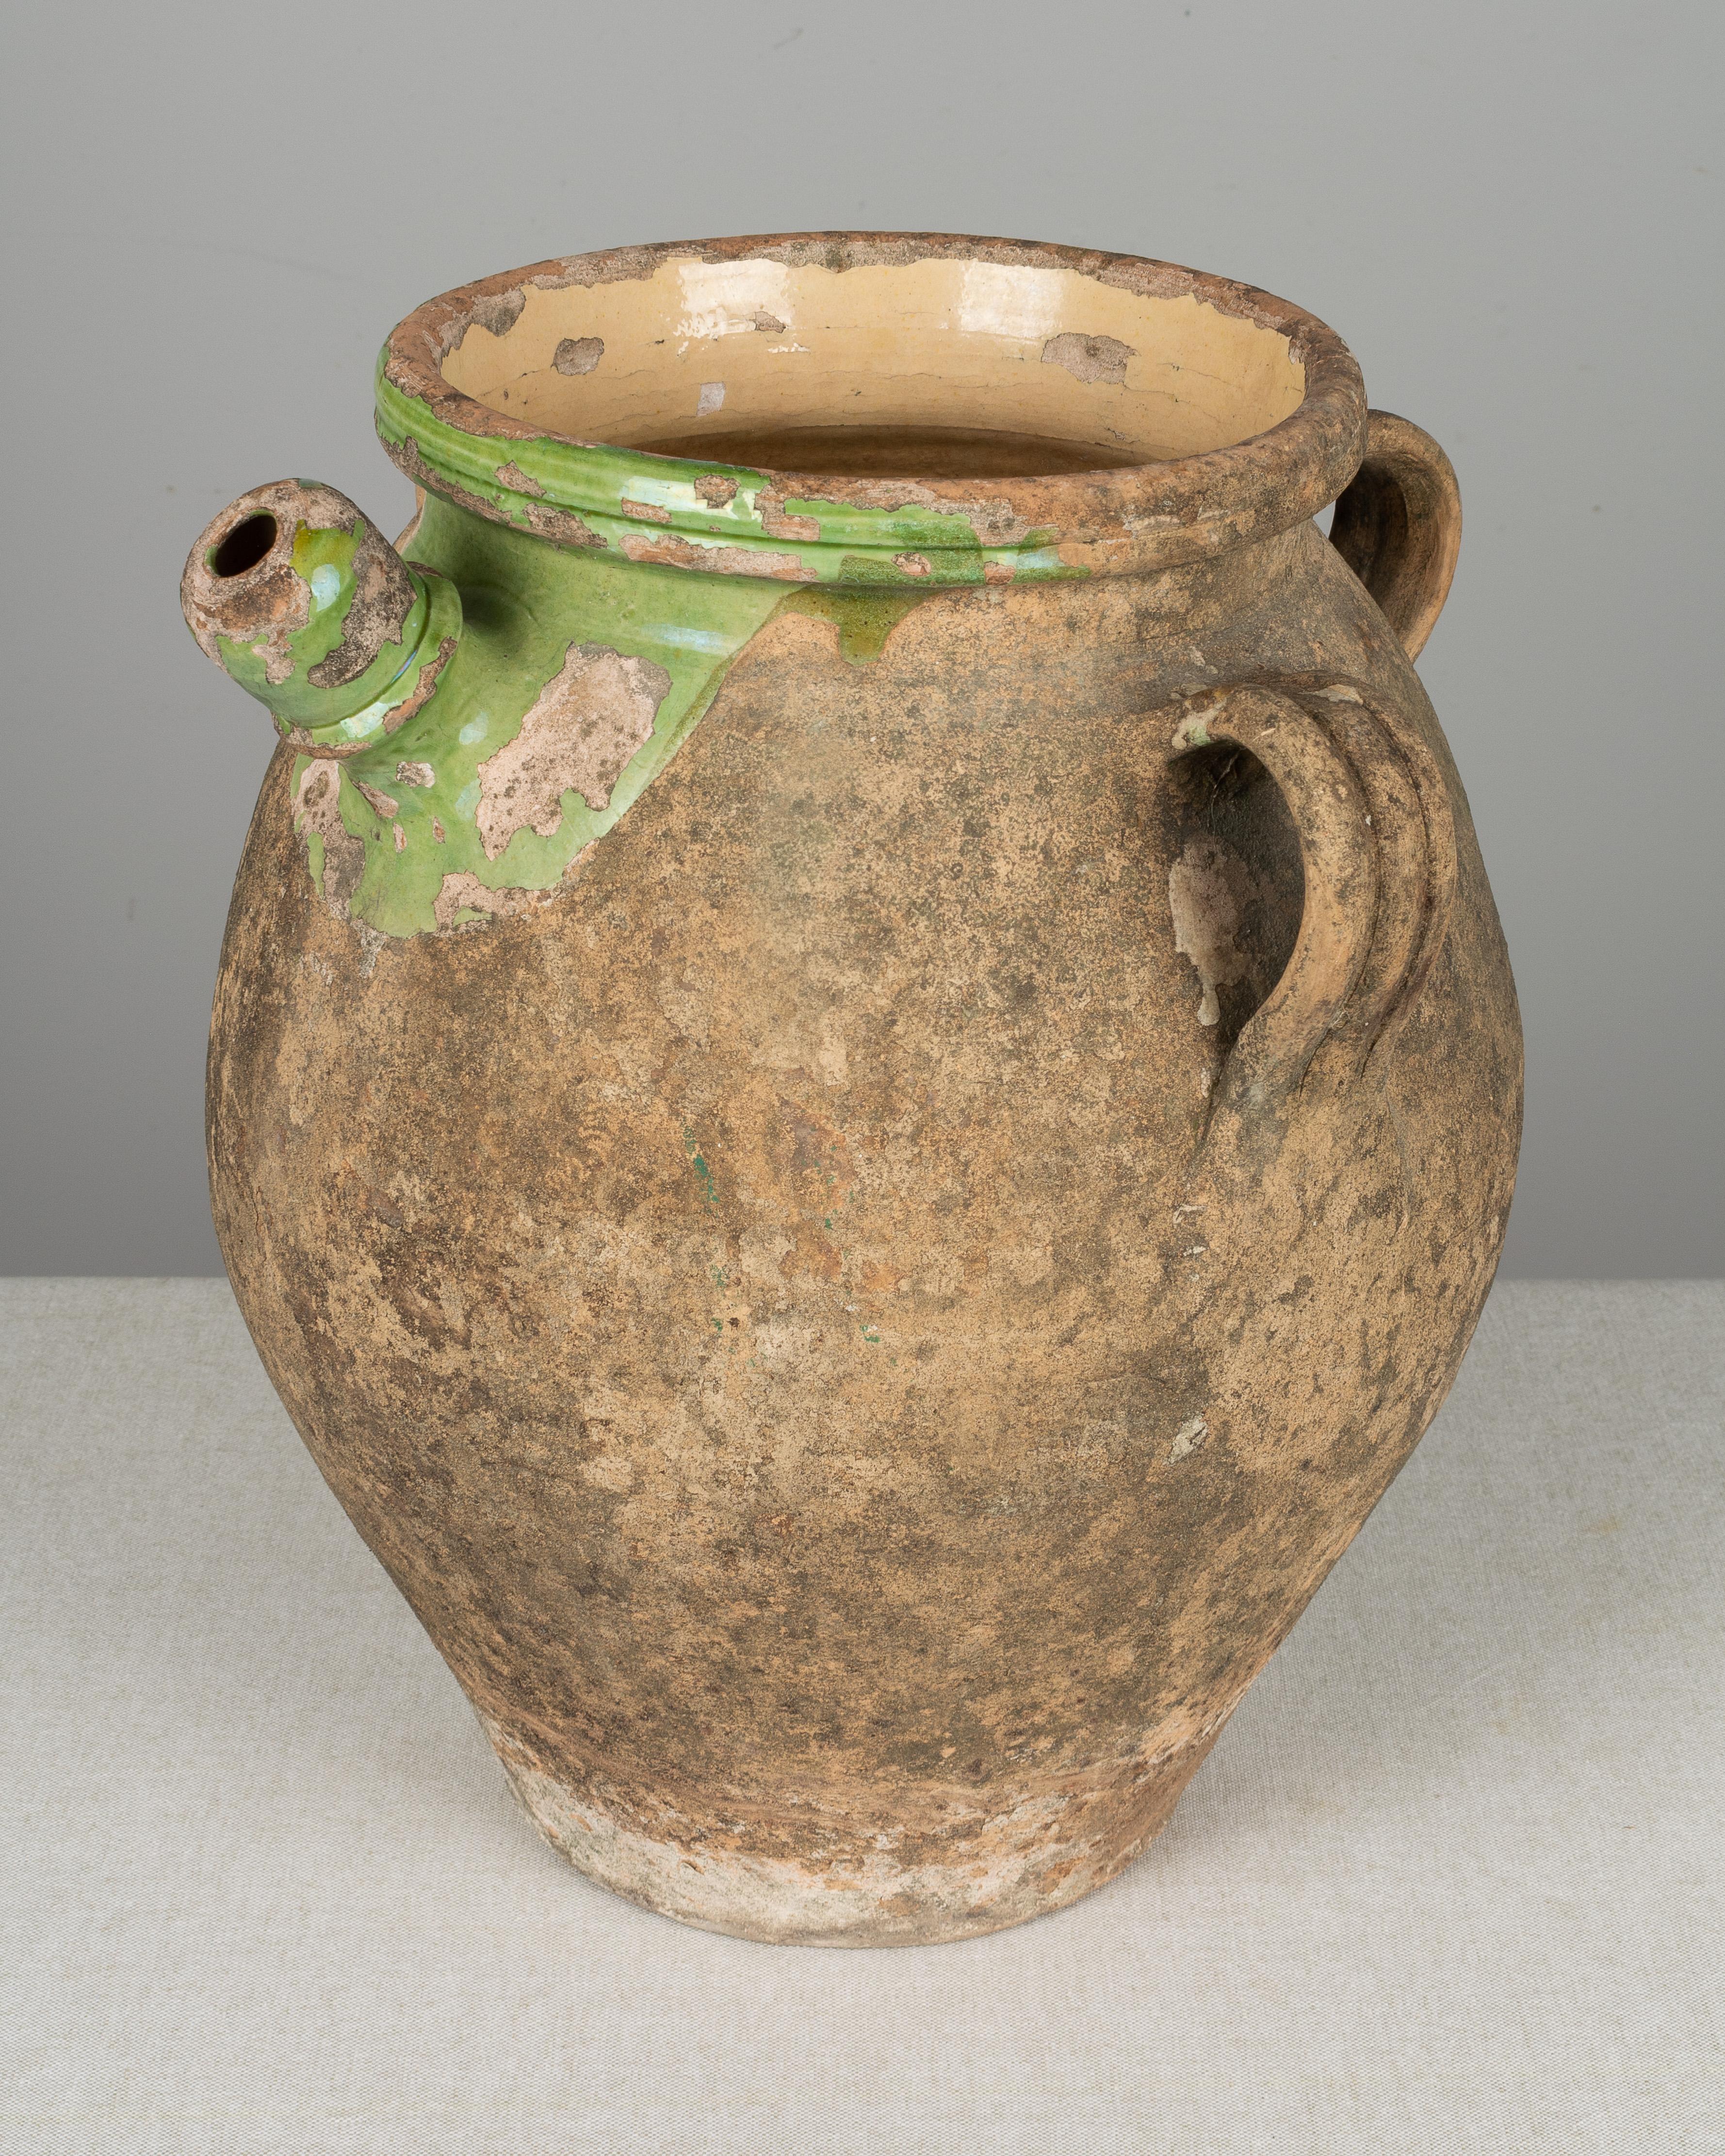 A 19th century earthenware pot from the Southwest of France with three handles and a large spout. Old weathered patina with remnants of pale jade green glaze on the exterior and pale yellow glaze on the interior. There is a hole in the bottom for